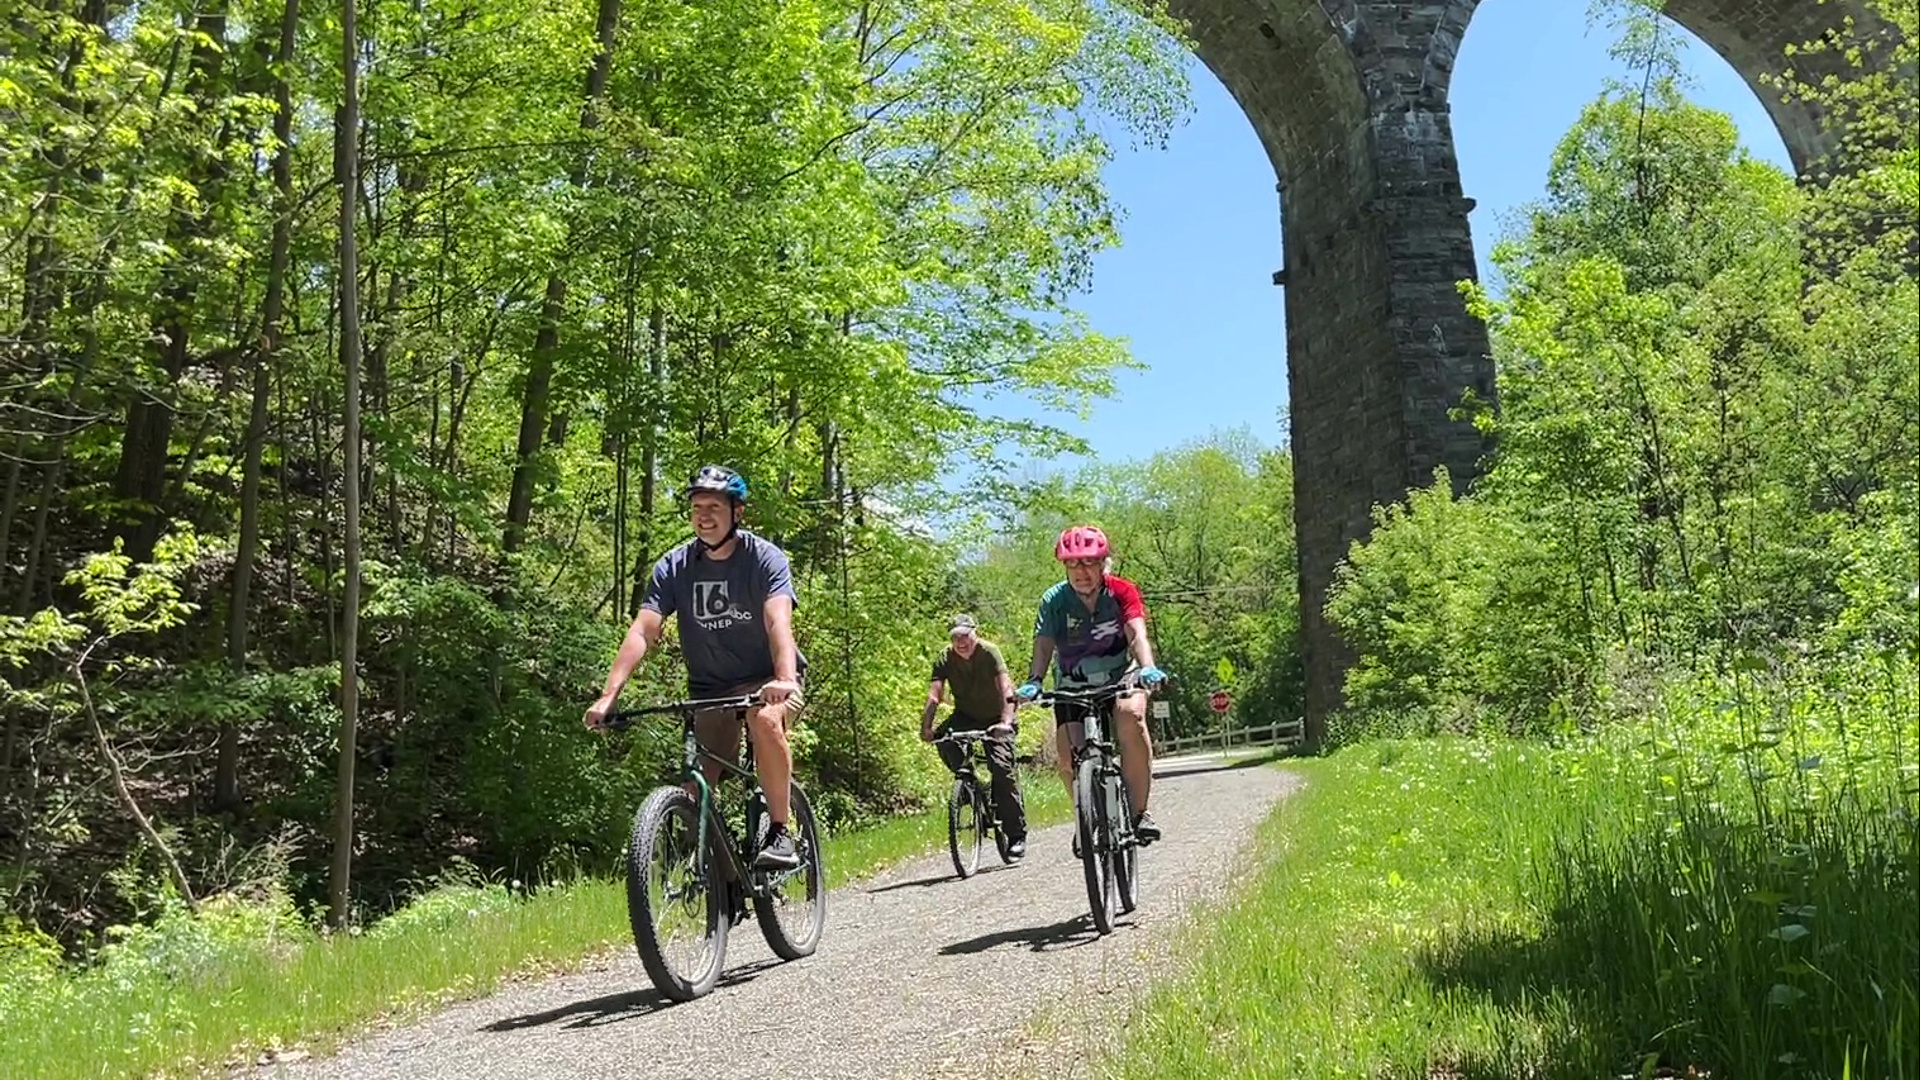 The D&H Rail Trail in Susquehanna County offers a view of history on two wheels.